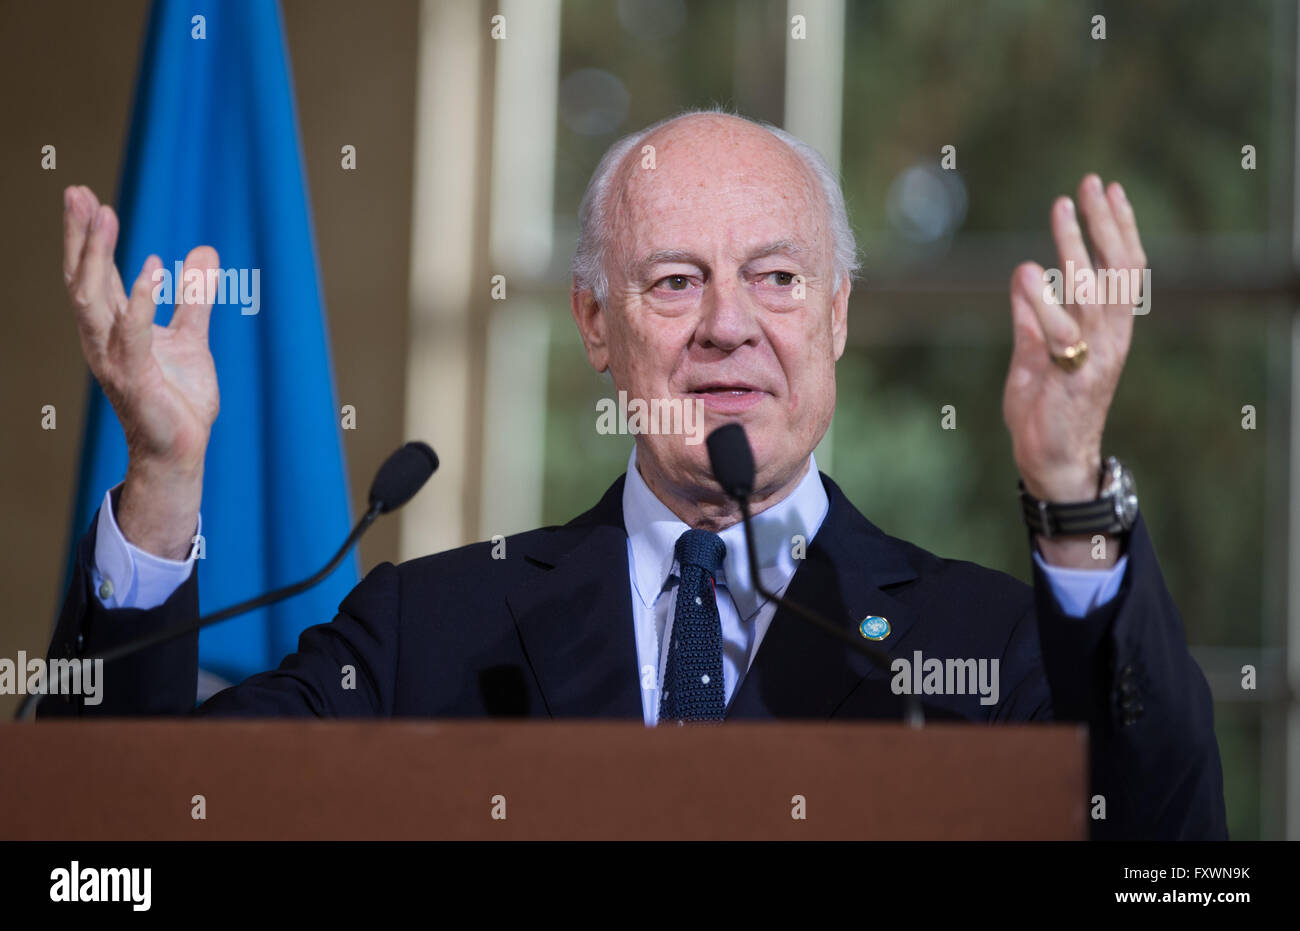 Geneva, Switzerland. 18th Apr, 2016. UN Special Envoy for Syria Staffan de Mistura gestures during a press conference in Geneva, Switzerland, April 18, 2016. UN Special Envoy for Syria Staffan de Mistura on Monday said that the main Syrian opposition delegation, the High Negotiation Committee or HNC, is intending to suspend their formal presence to the ongoing peace talks in the UN headquarters of the Palace des Nations, but will remain staying in Geneva for technical discussions. © Xu Jinquan/Xinhua/Alamy Live News Stock Photo